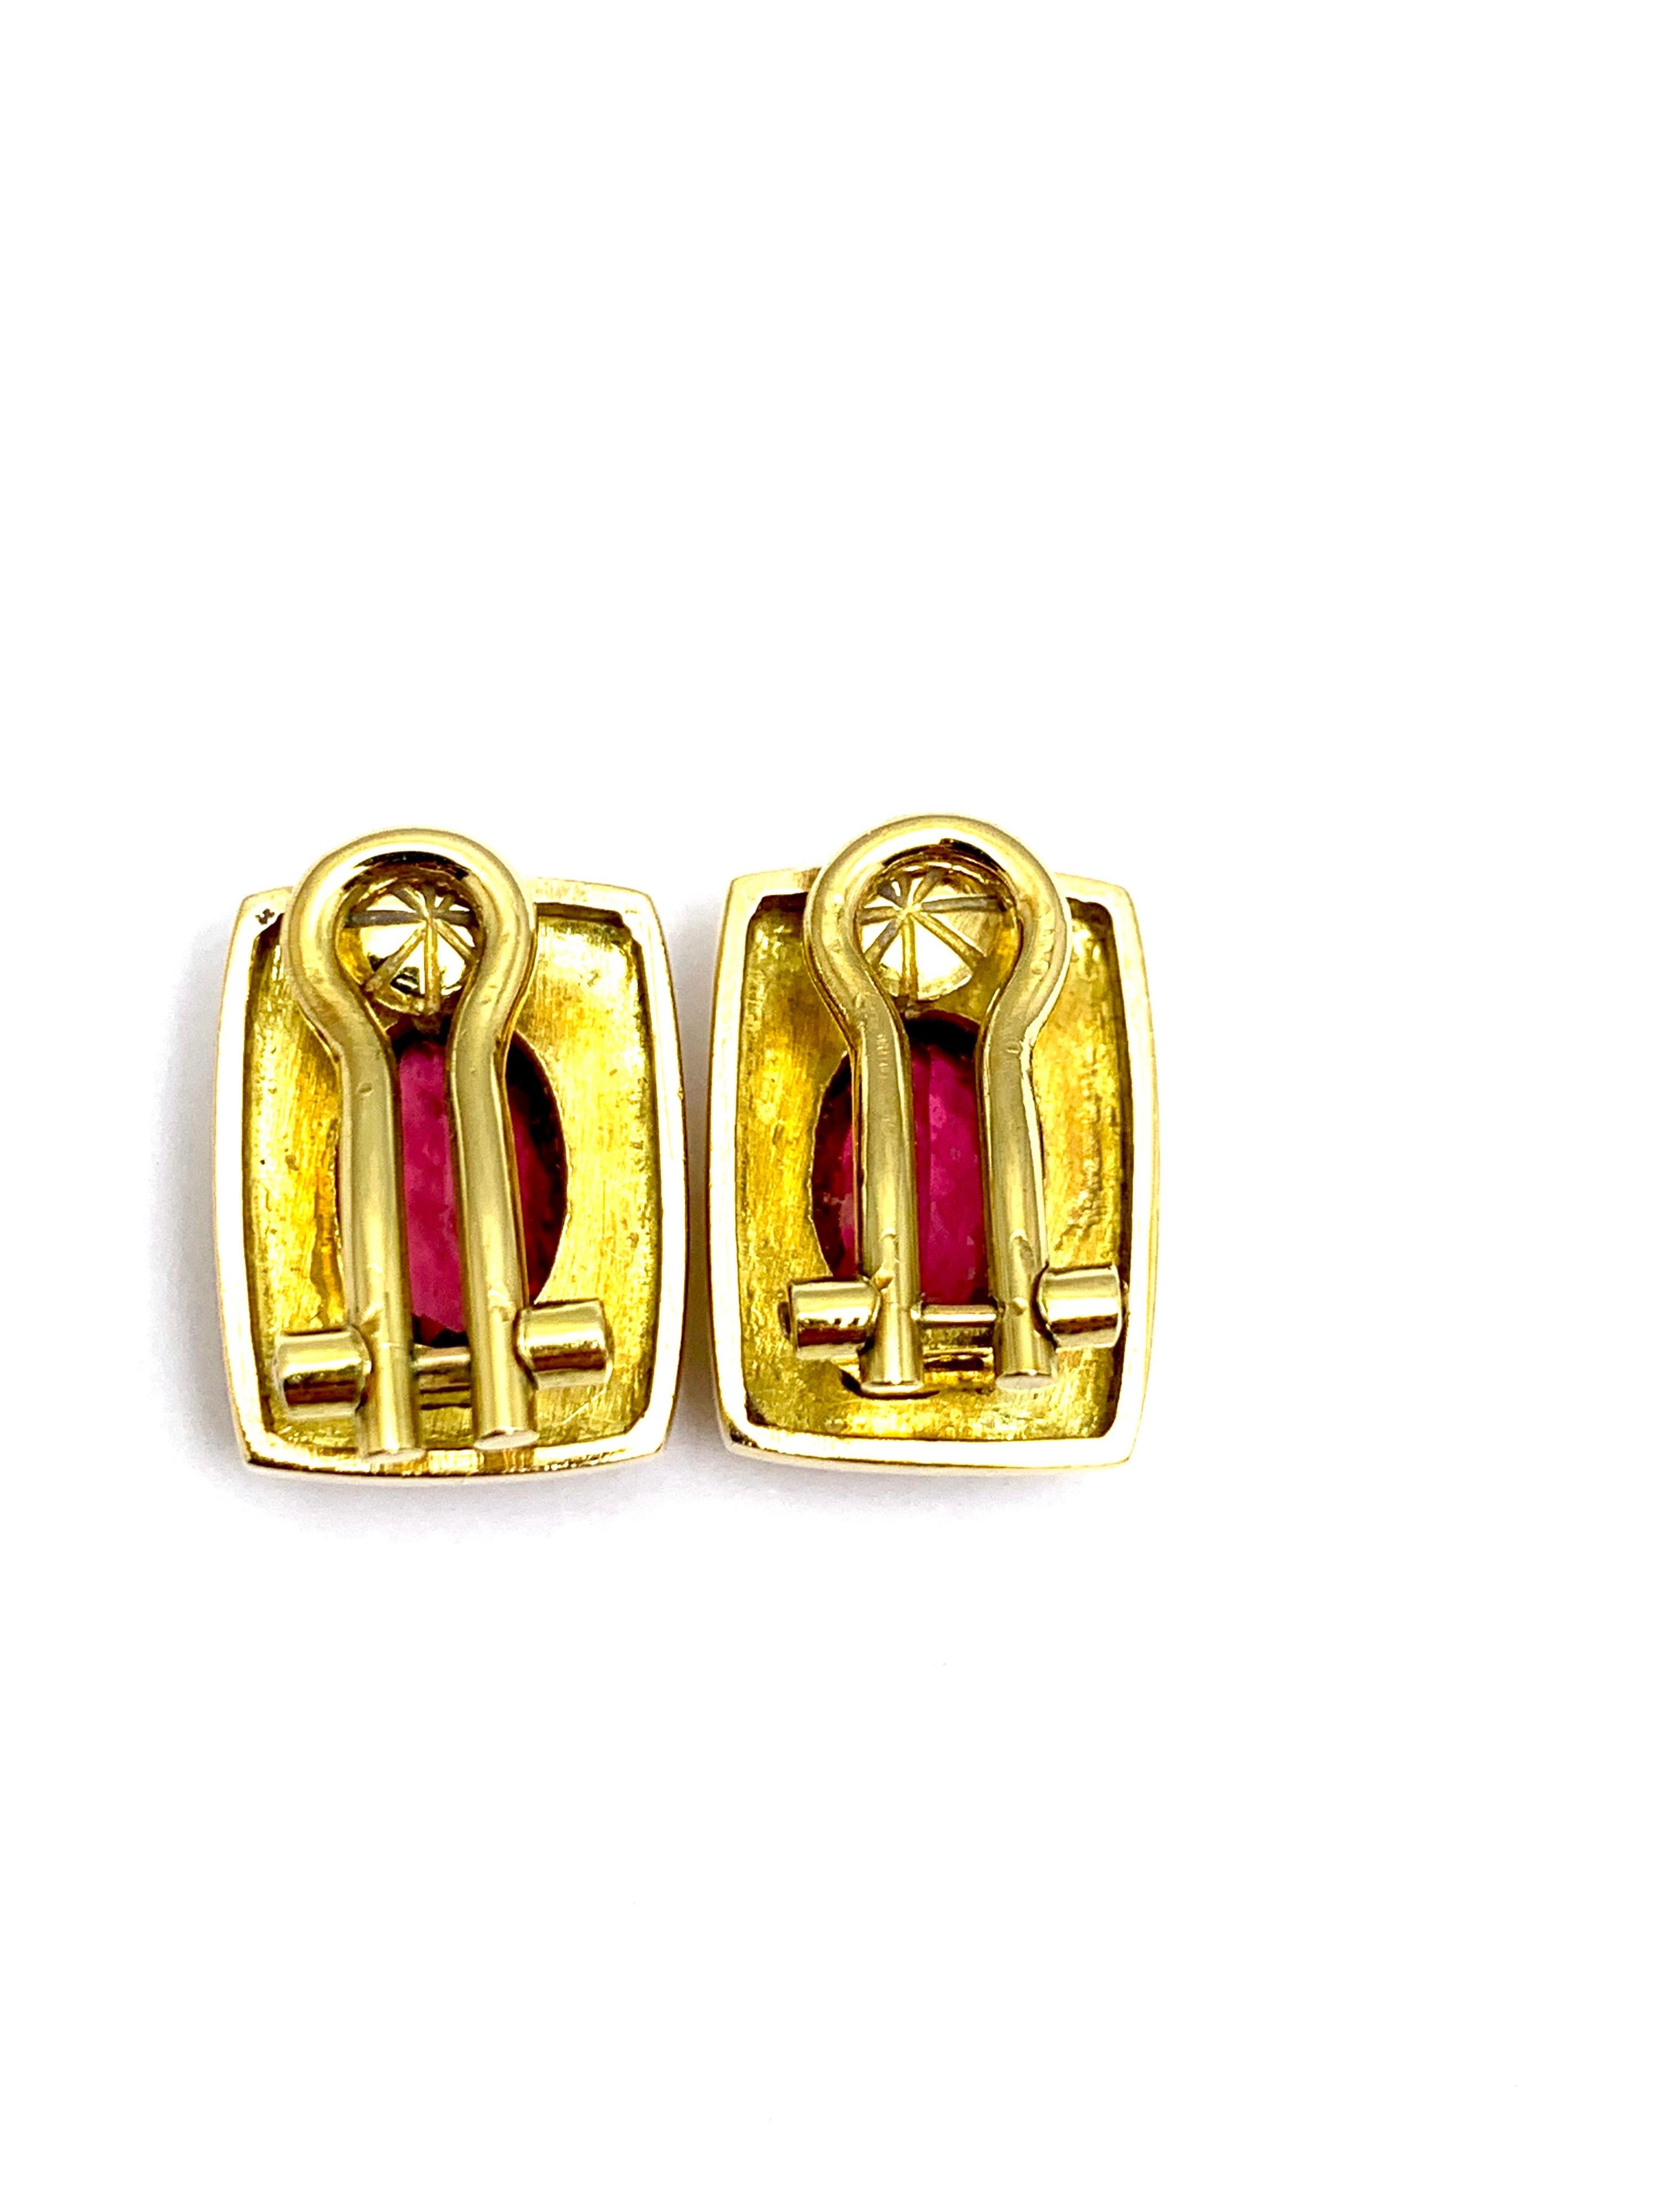 Oval Cut Burle Marx 3.89 Carat Faceted Oval Pink Tourmaline and Yellow Gold Earrings For Sale